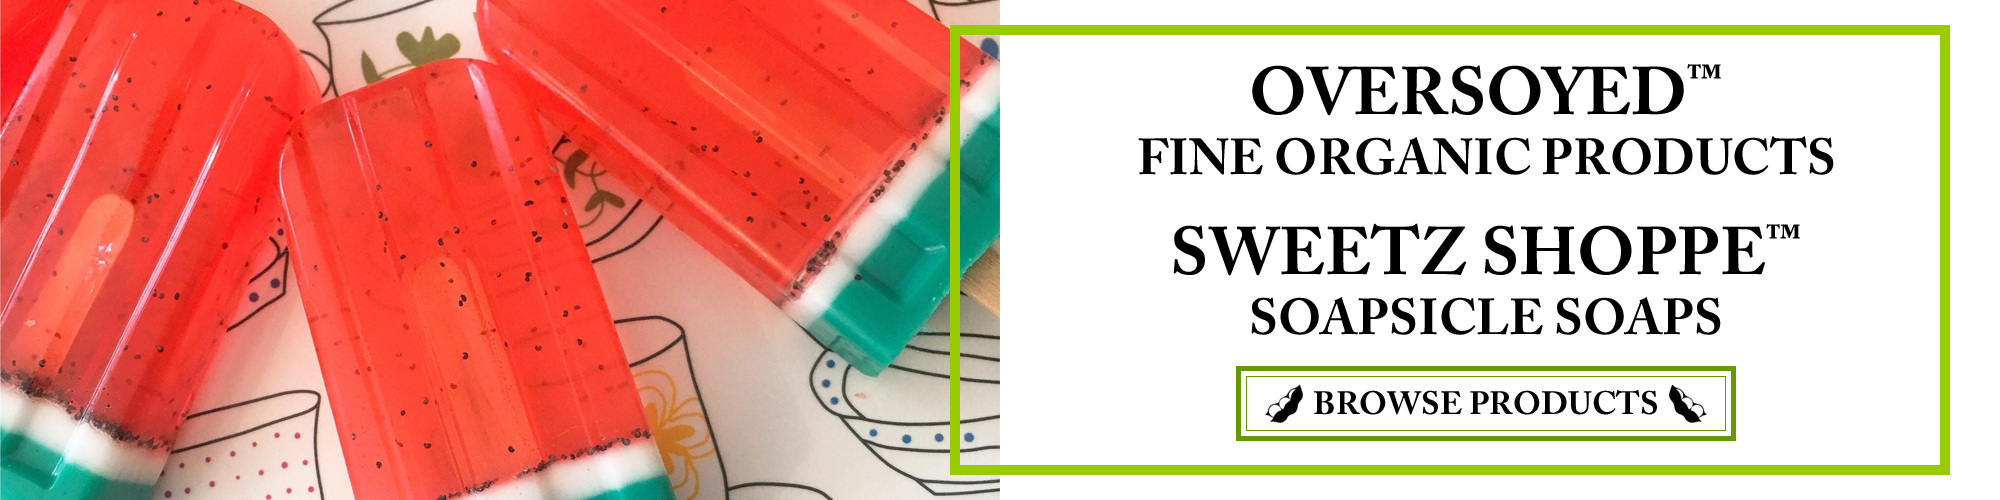 OverSoyed Fine Organic Products - Sweetz Shoppe™ Soapsicle Popsicle Soaps